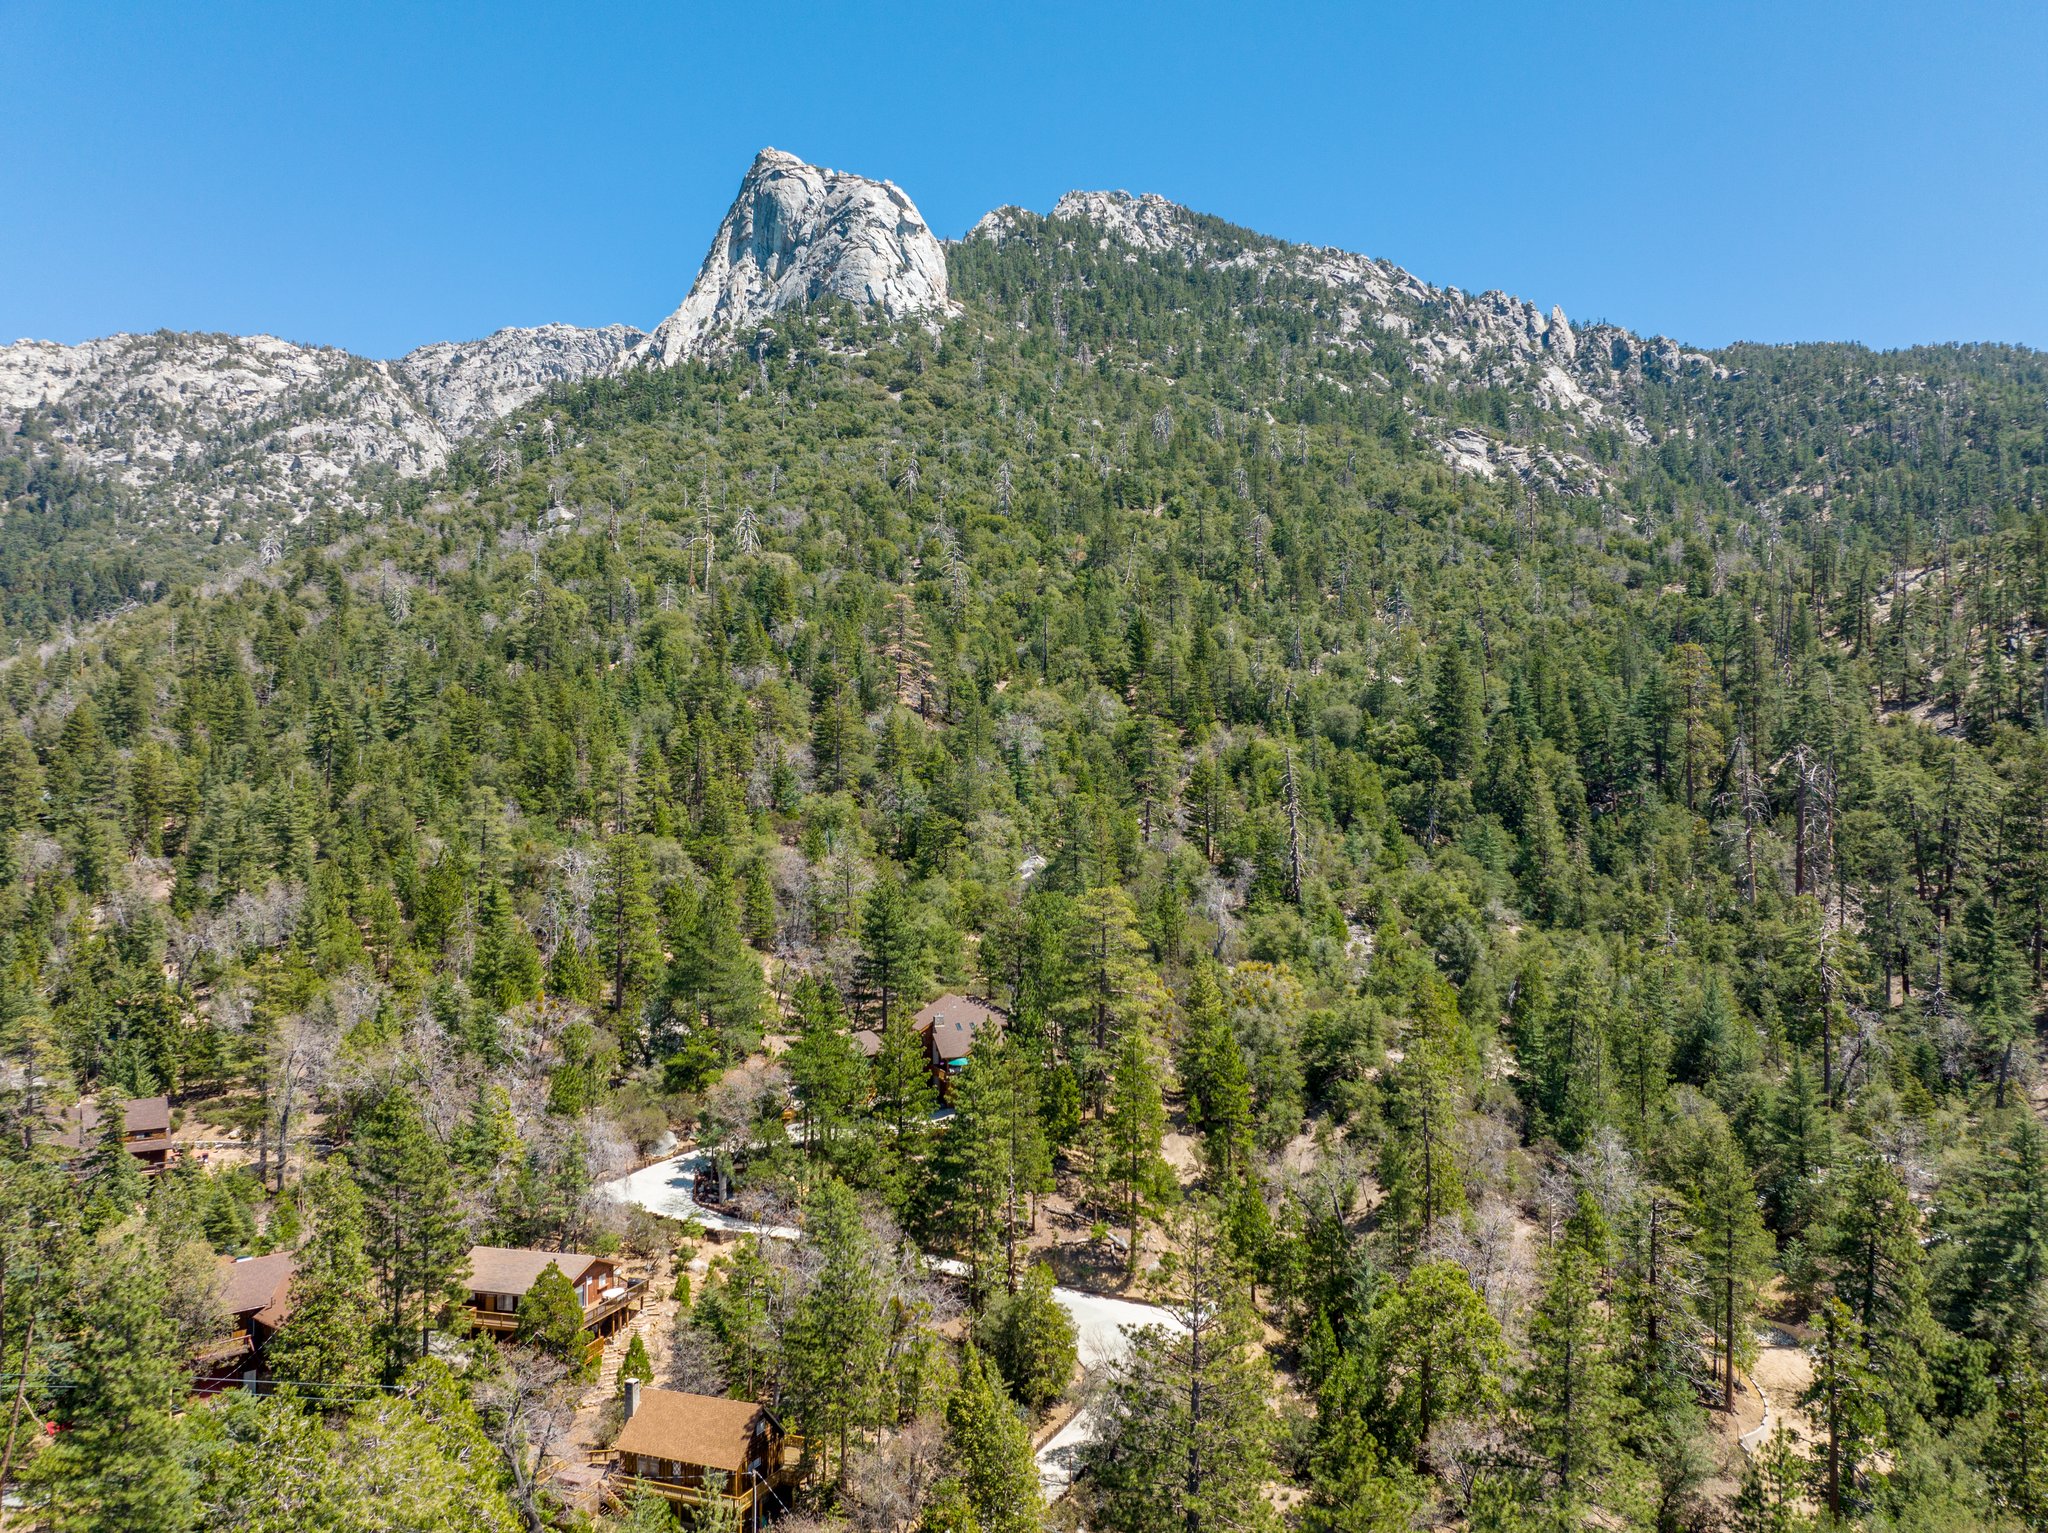 Tahquitz Rock and the National Forest